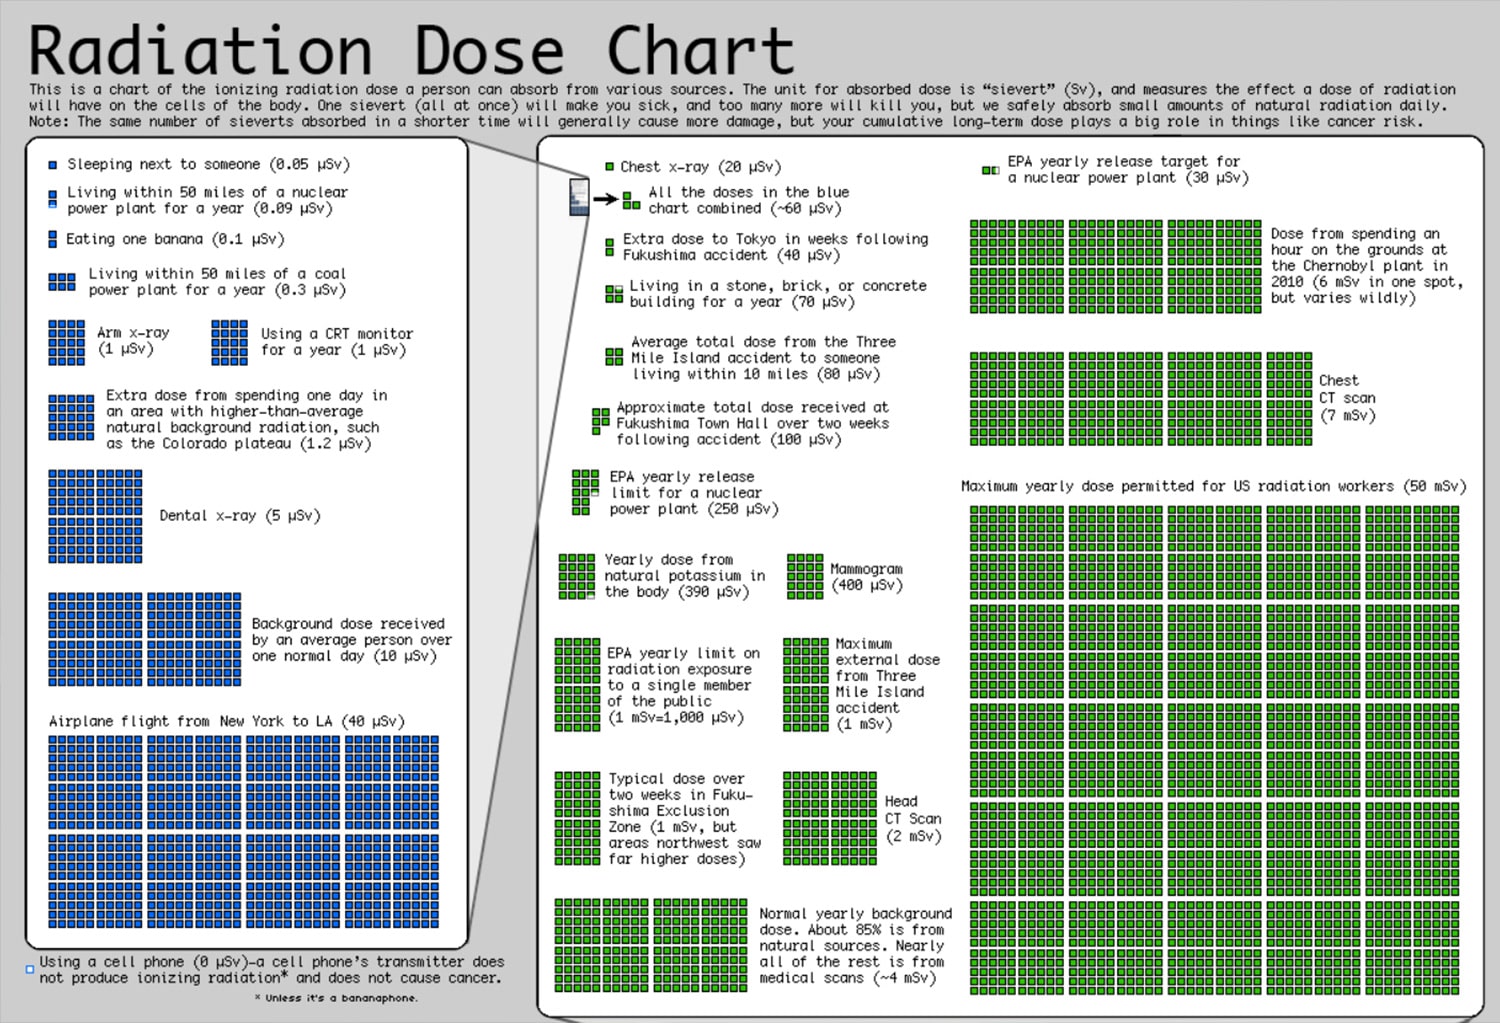 Extract from Randall Munroe's superb Radiation Dose Chart. Source: <a href='https://xkcd.com/radiation/'>https://xkcd.com/radiation/</a>